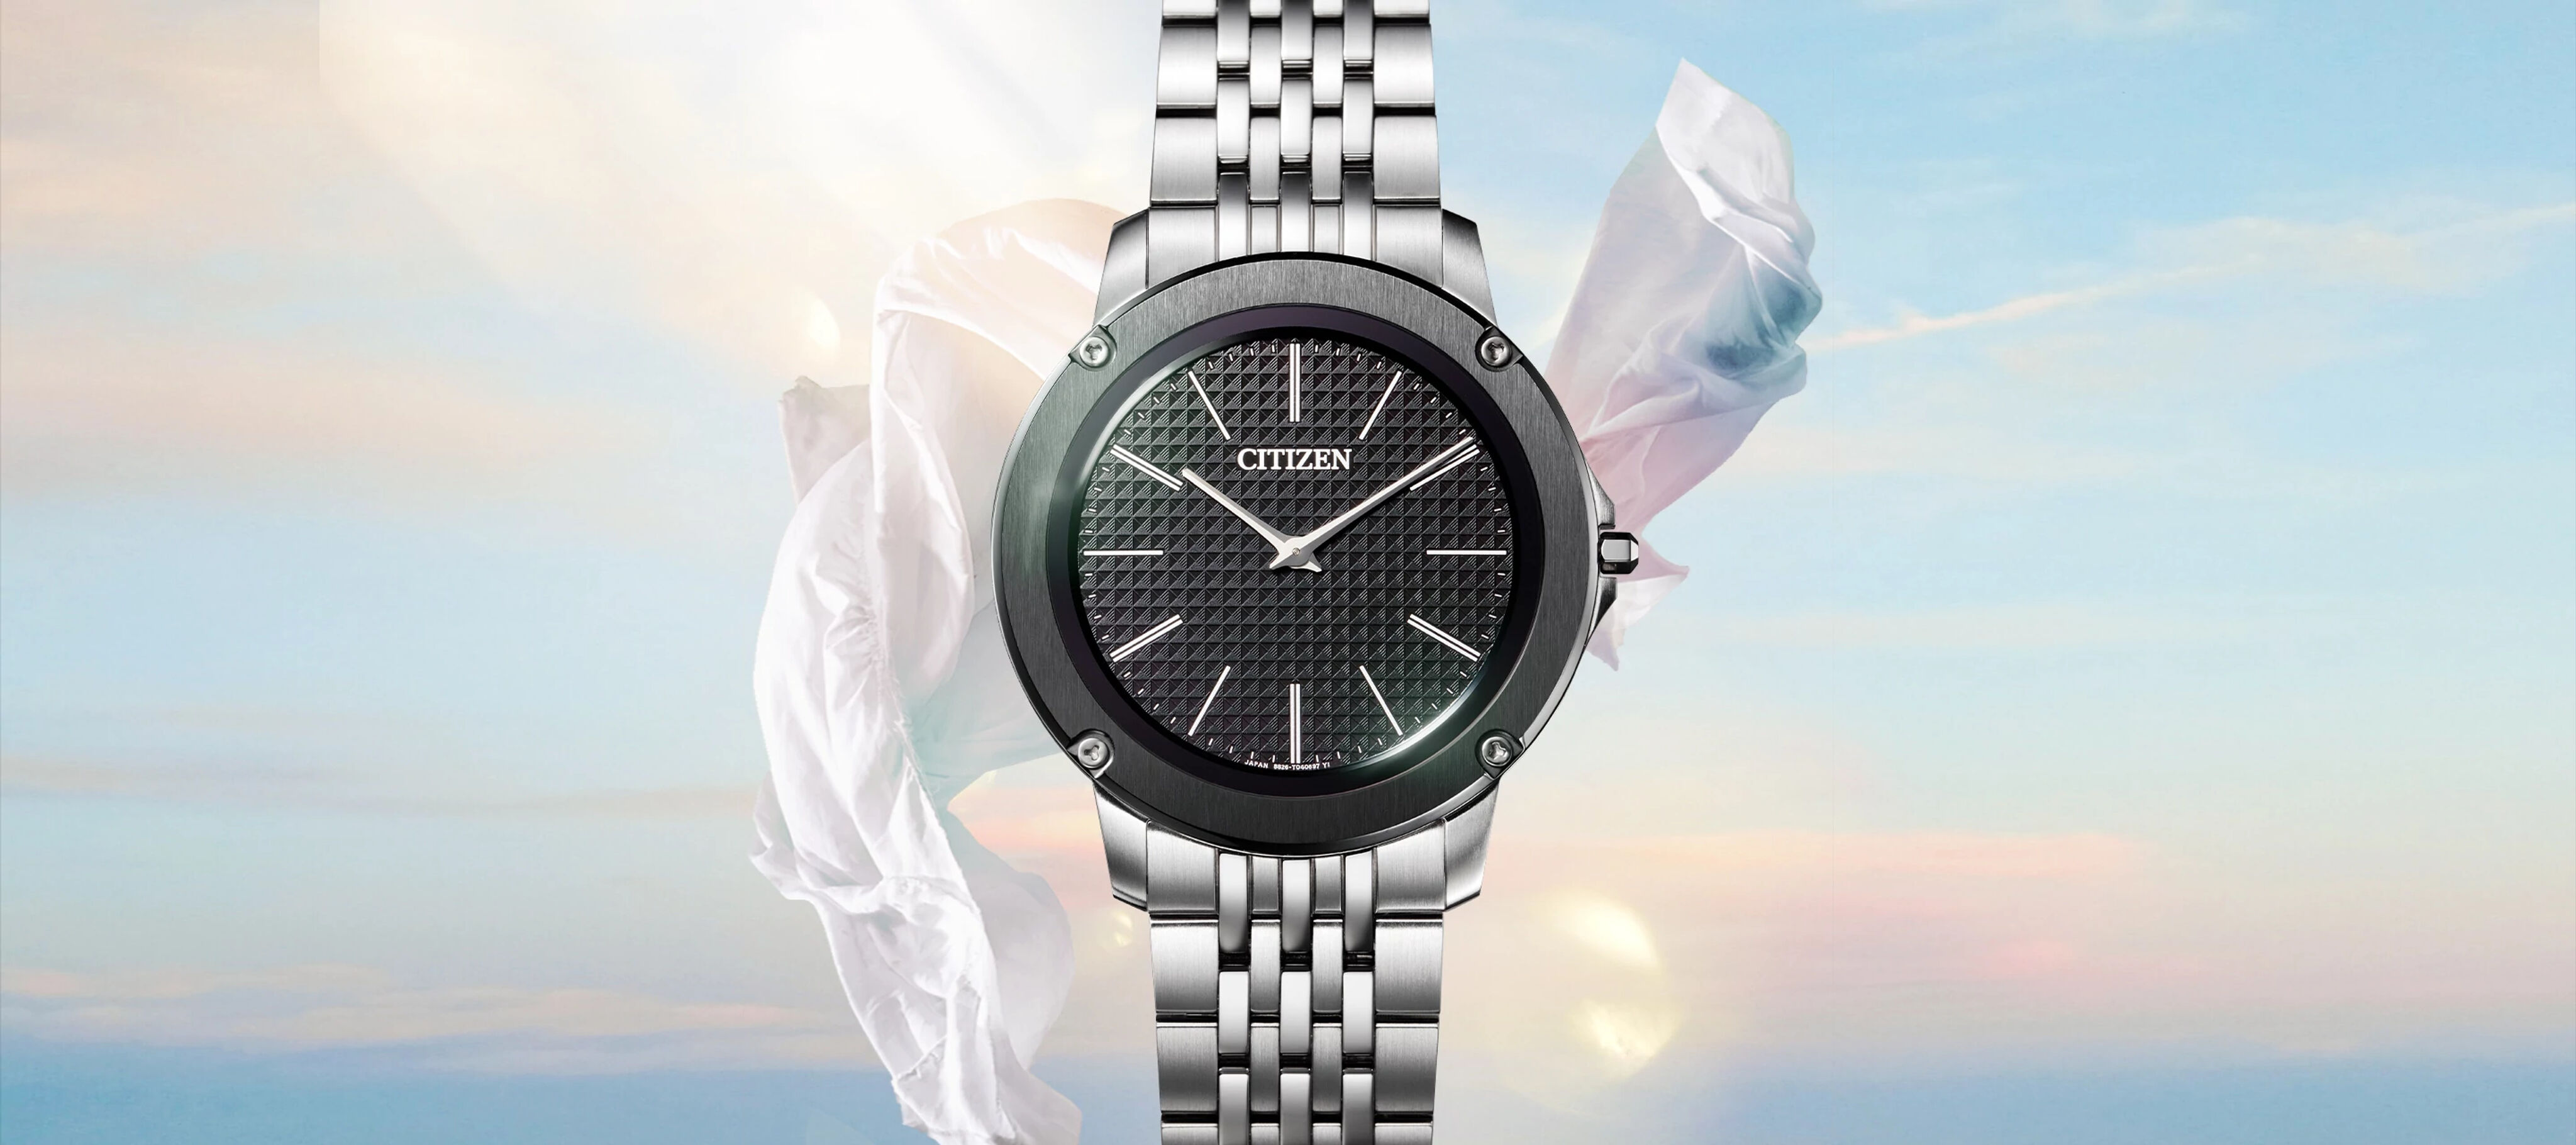 Eco-Drive One Watches - Our Thinnest Light-Powered Watch. | CITIZEN